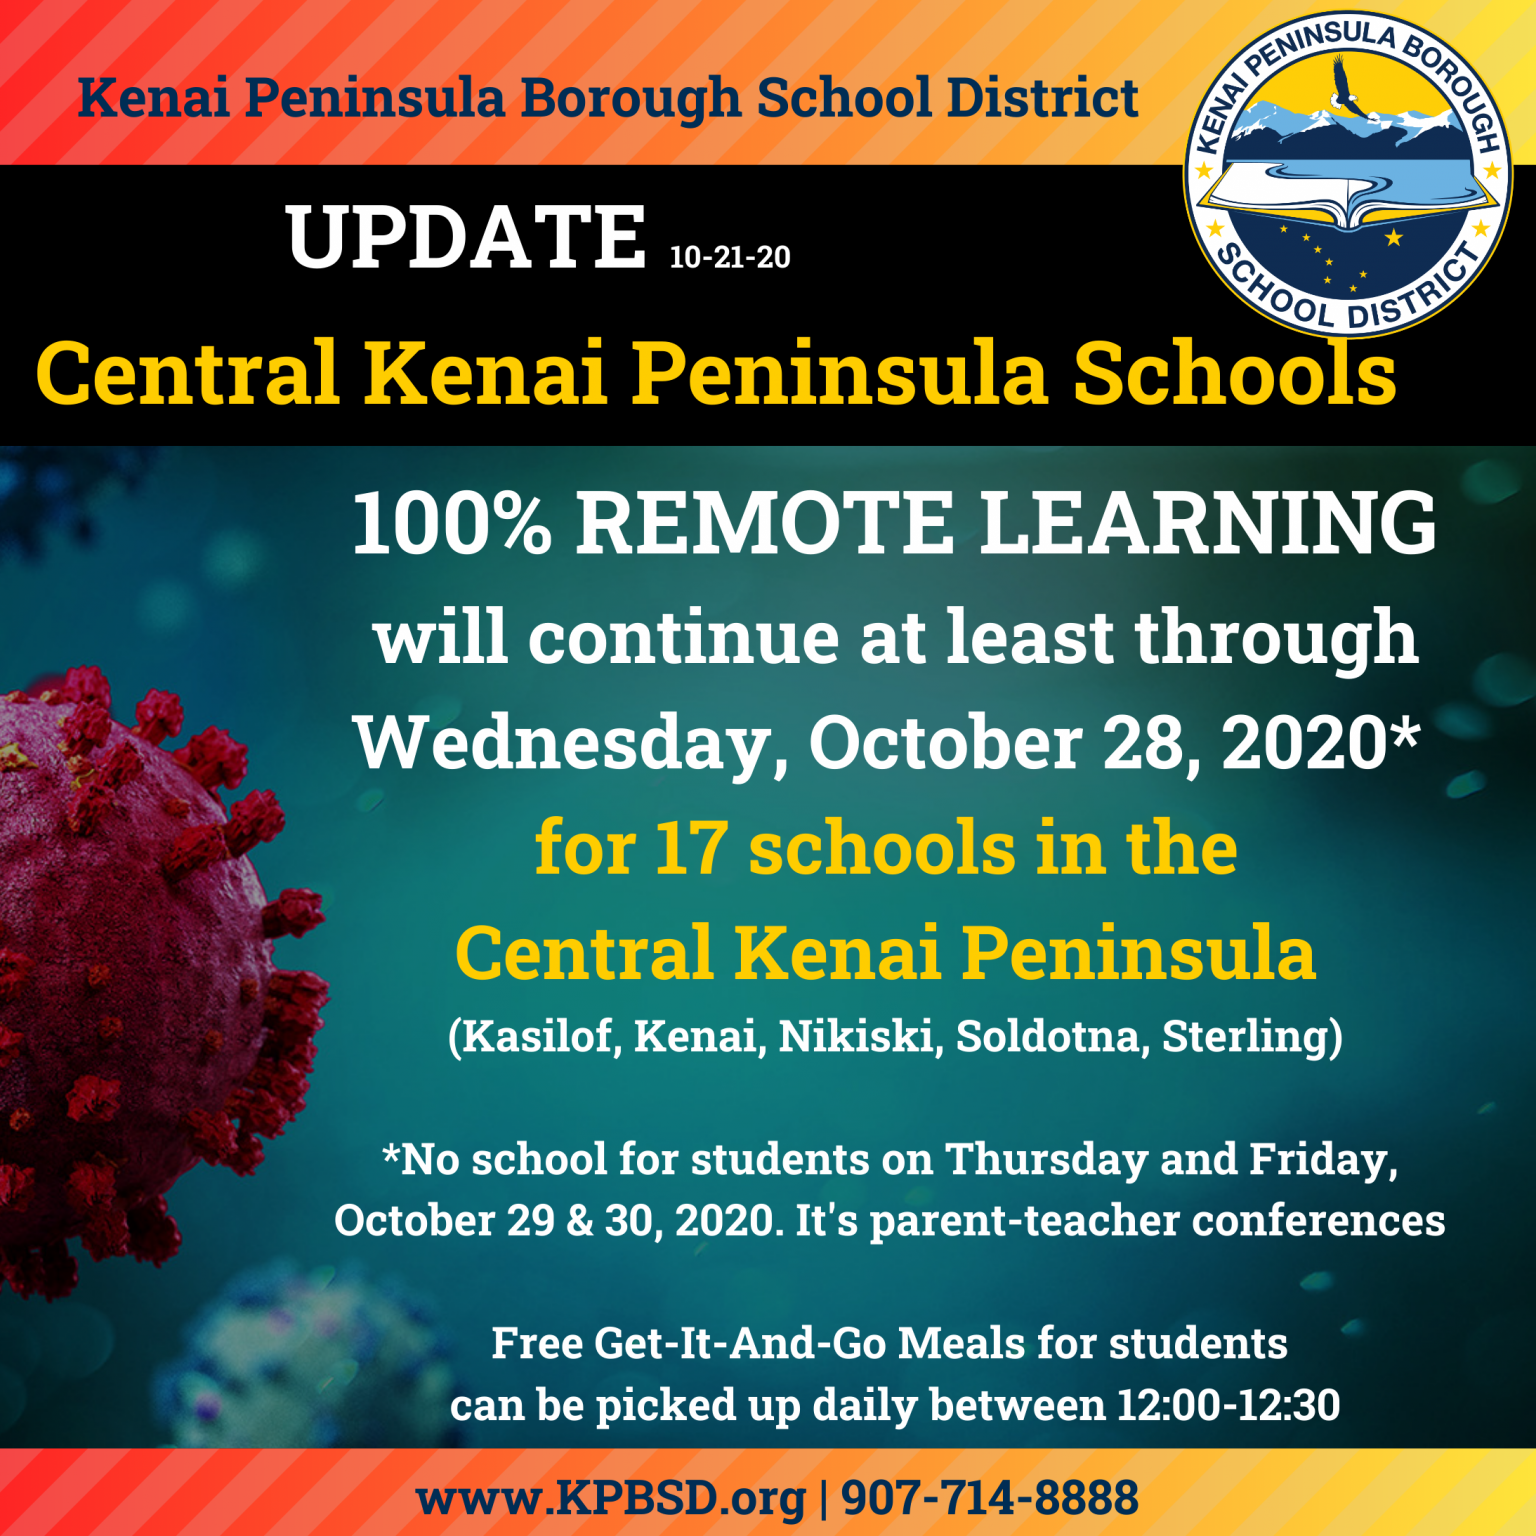 100% Remote Learning extended for 17 KPBSD Central Kenai Peninsula